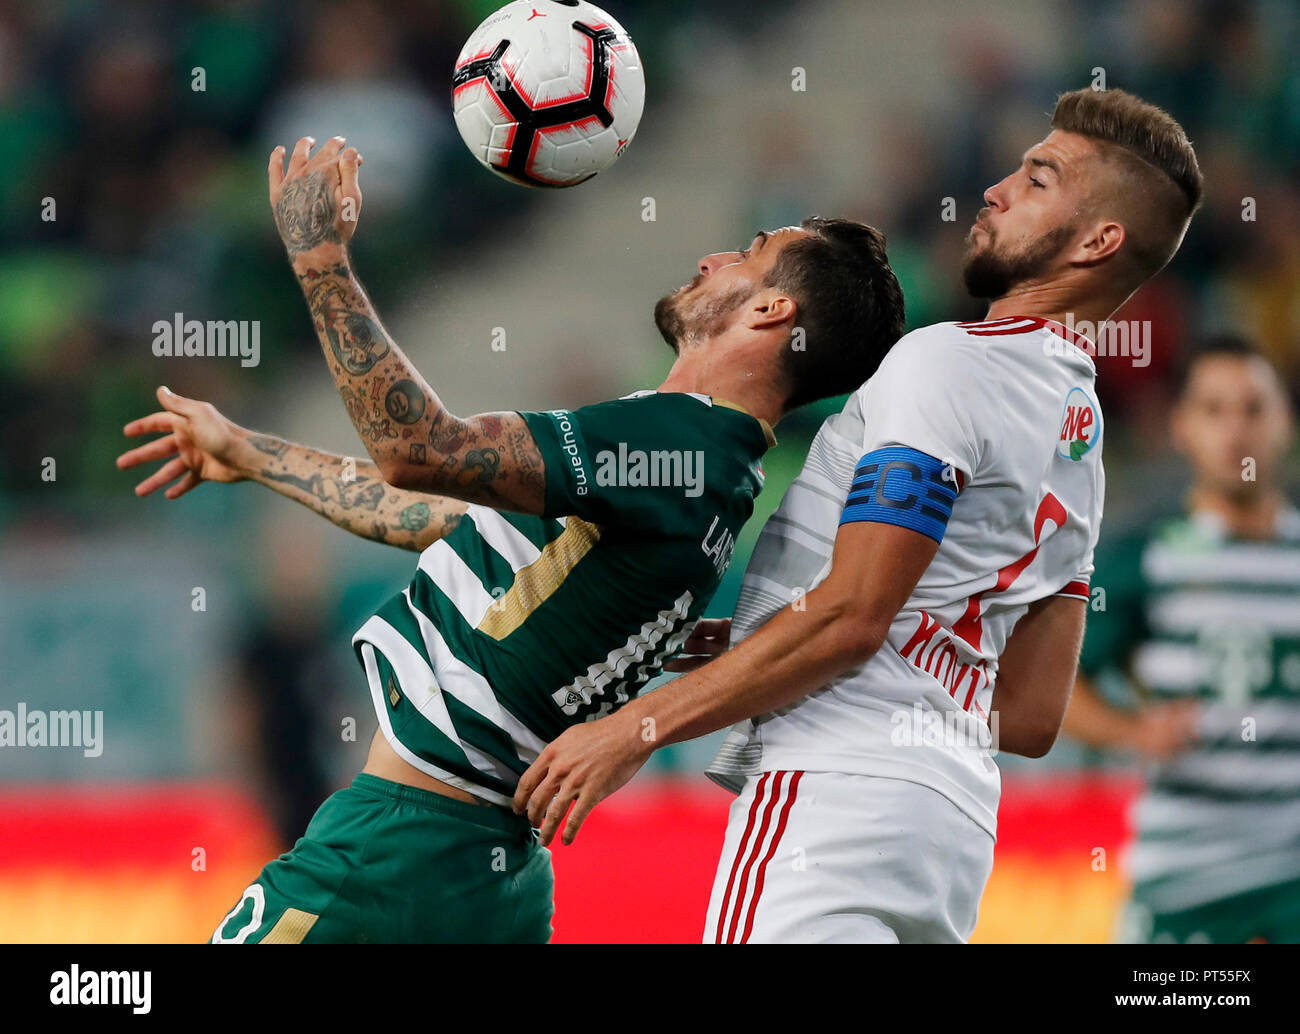 BUDAPEST, HUNGARY - OCTOBER 6: (l-r) Davide Lanzafame of Ferencvarosi TC battles for the ball in the air with Akos Kinyik of DVSC during the Hungarian OTP Bank Liga match between Ferencvarosi TC and DVSC at Groupama Arena on October 6, 2018 in Budapest, Hungary. Credit: Laszlo Szirtesi/Alamy Live News Stock Photo